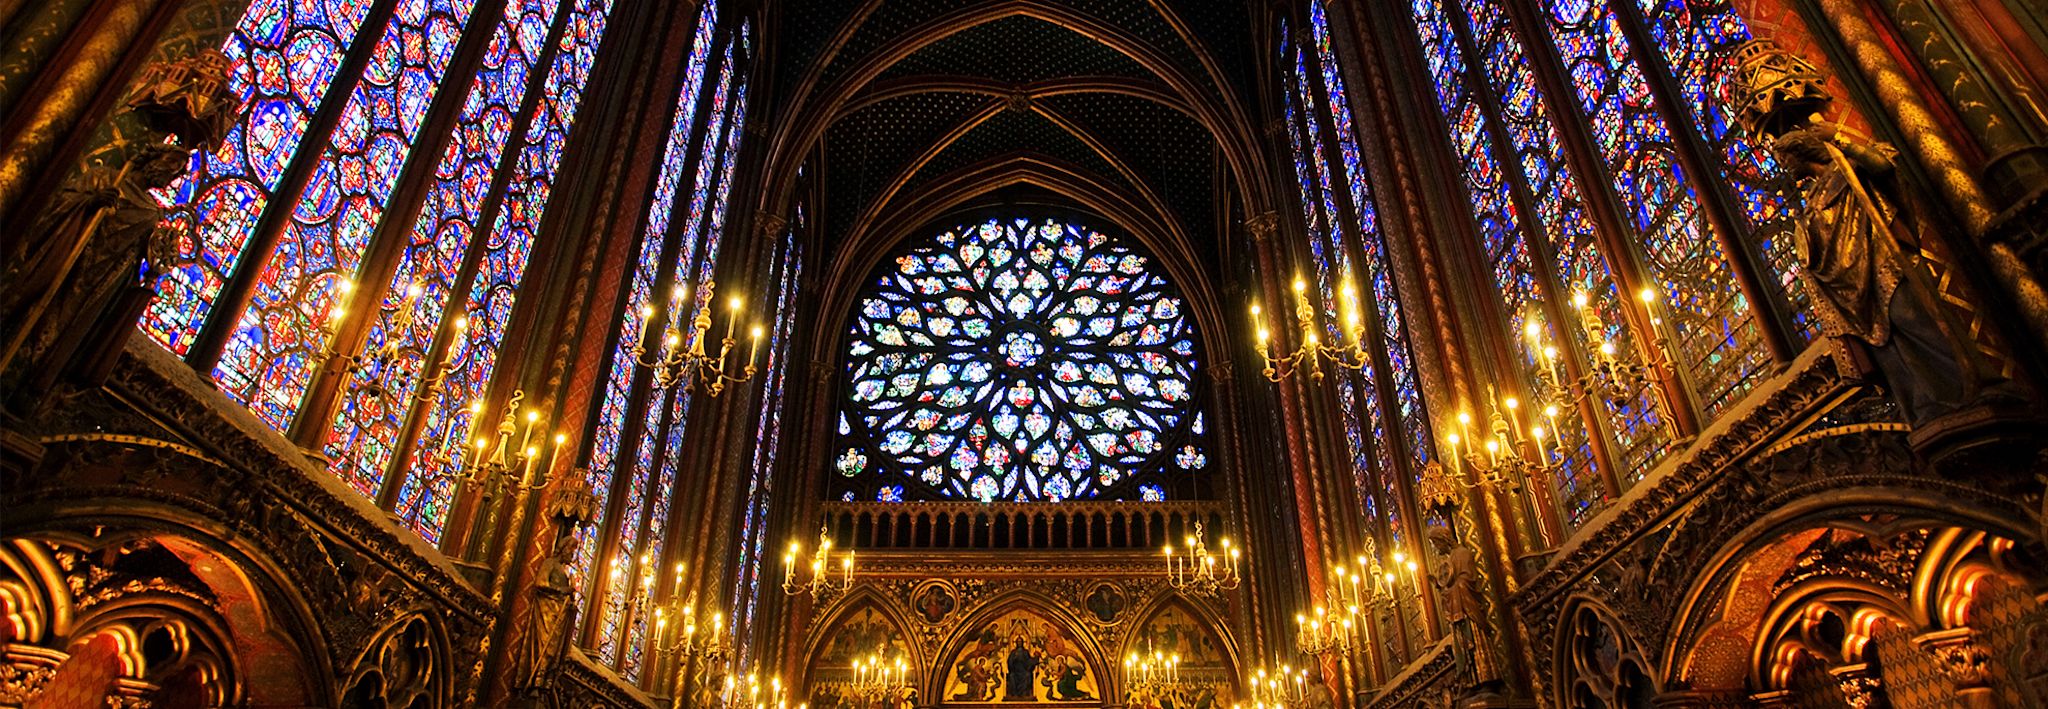 A historical church has stained glass and candles throughout it.